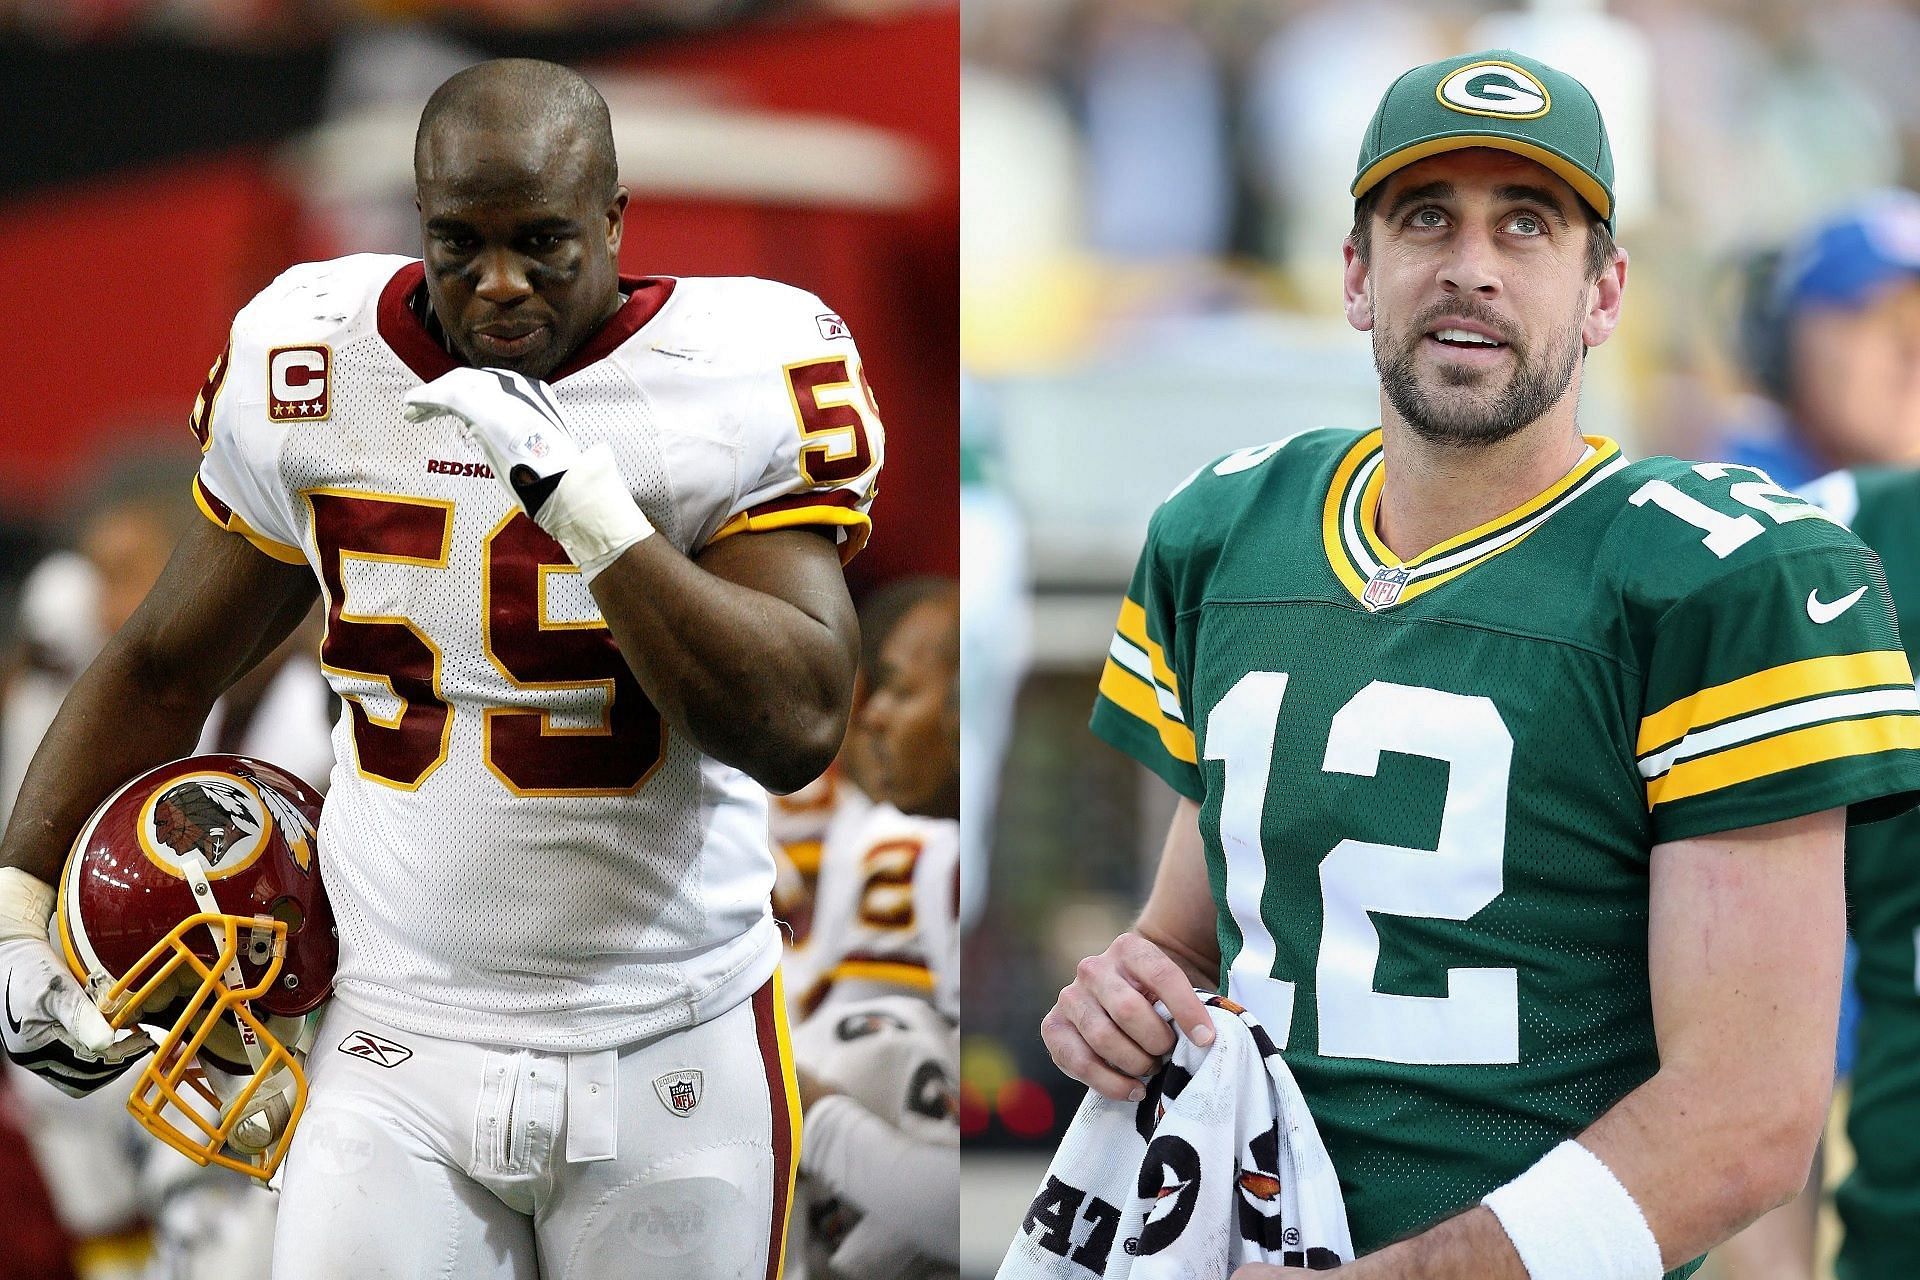 Aaron Rodgers once recalled losing sight in one eye after scary hit from London Fletcher